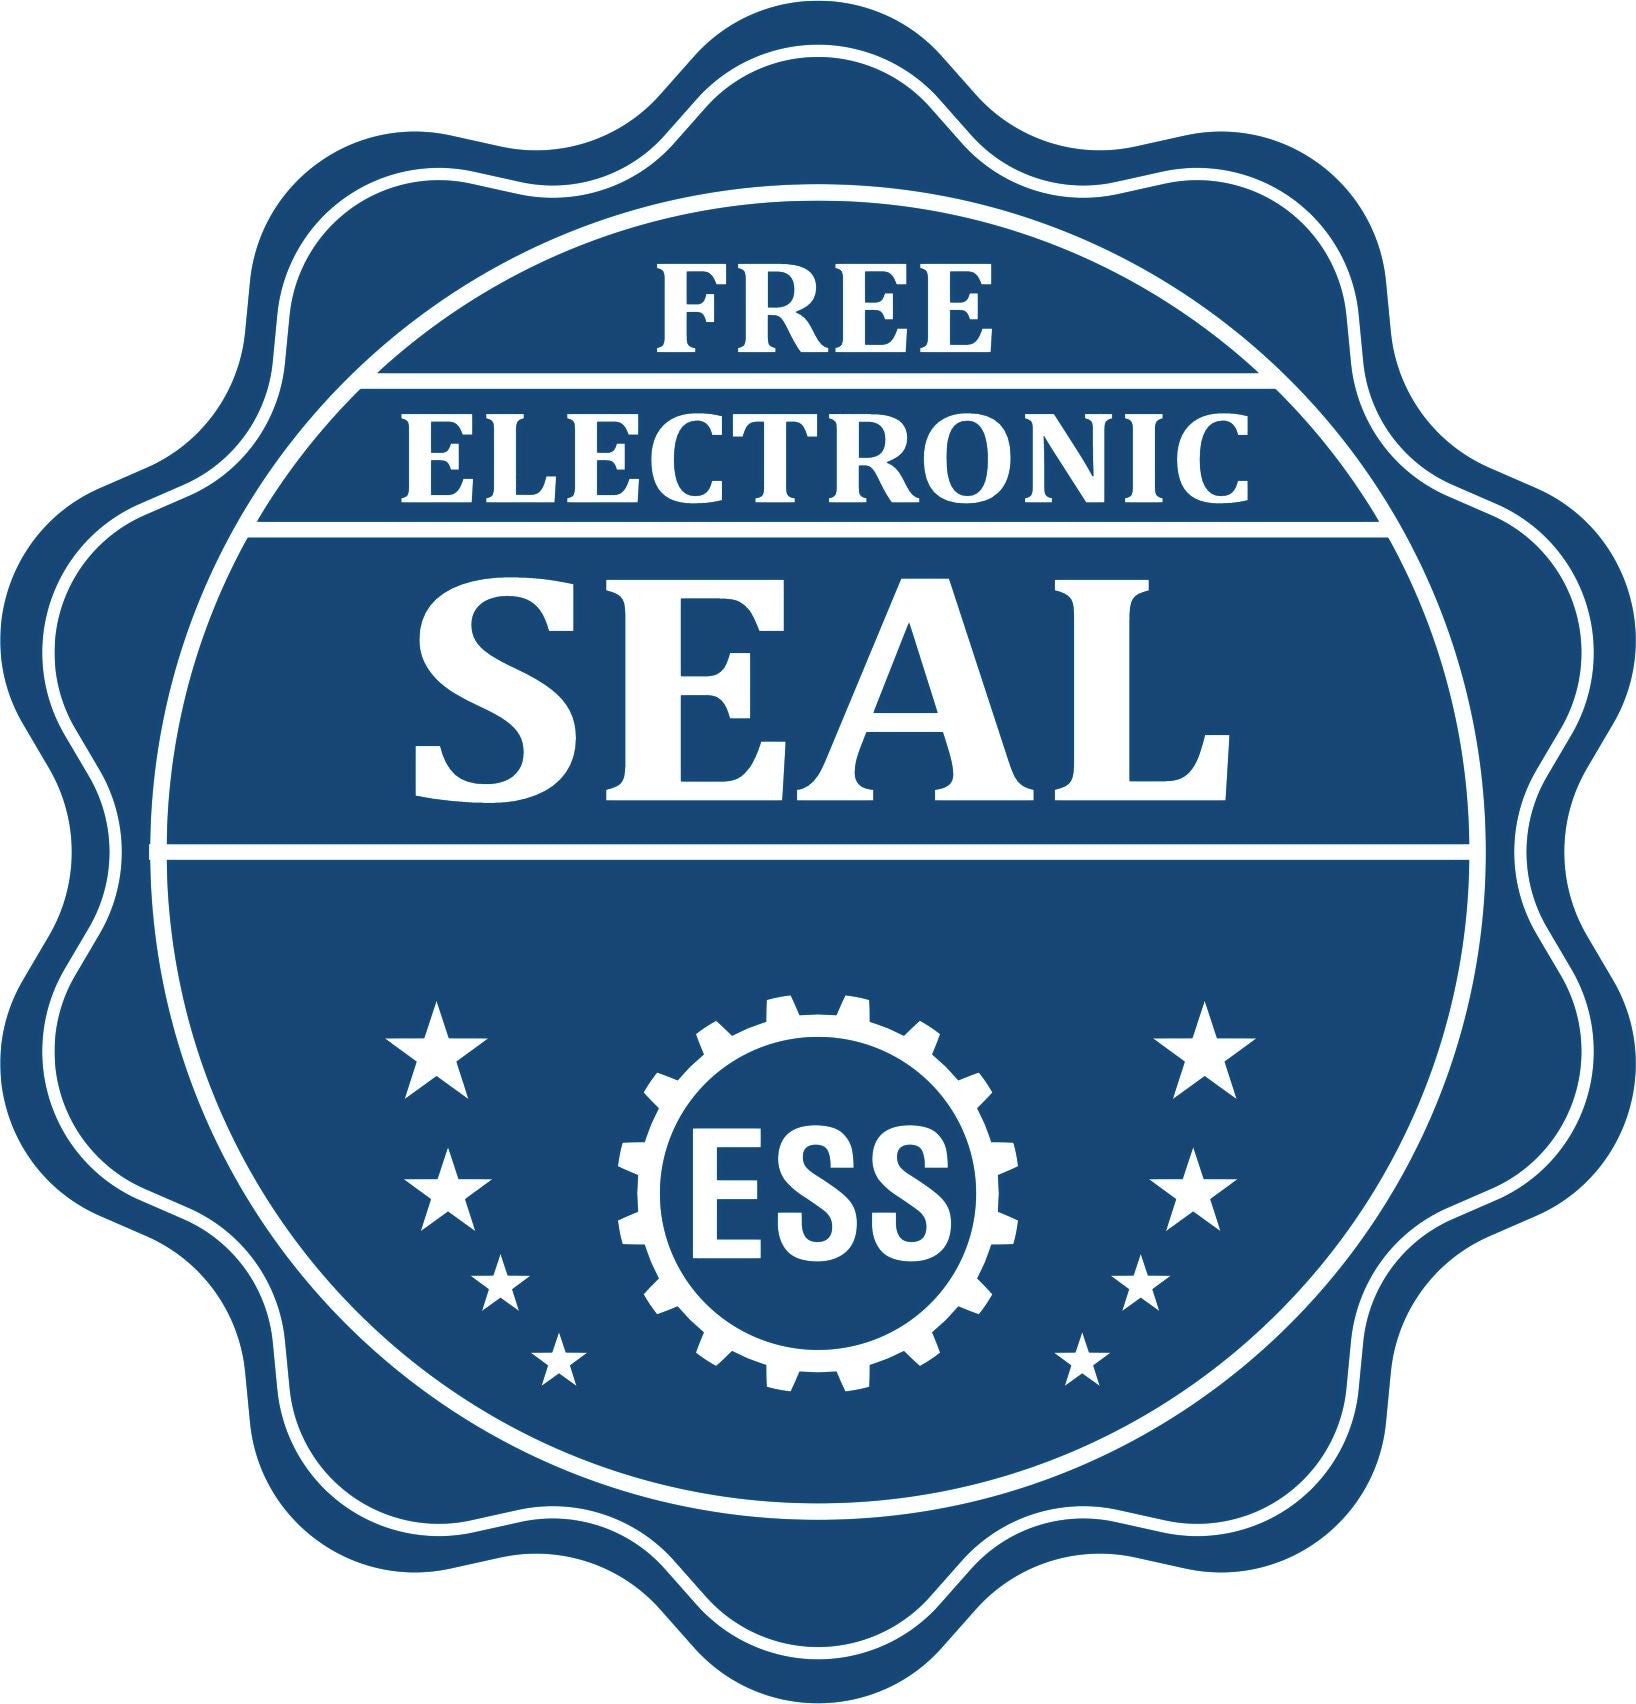 A badge showing a free electronic seal for the MaxLight Premium Pre-Inked Illinois Rectangular Notarial Stamp with stars and the ESS gear on the emblem.